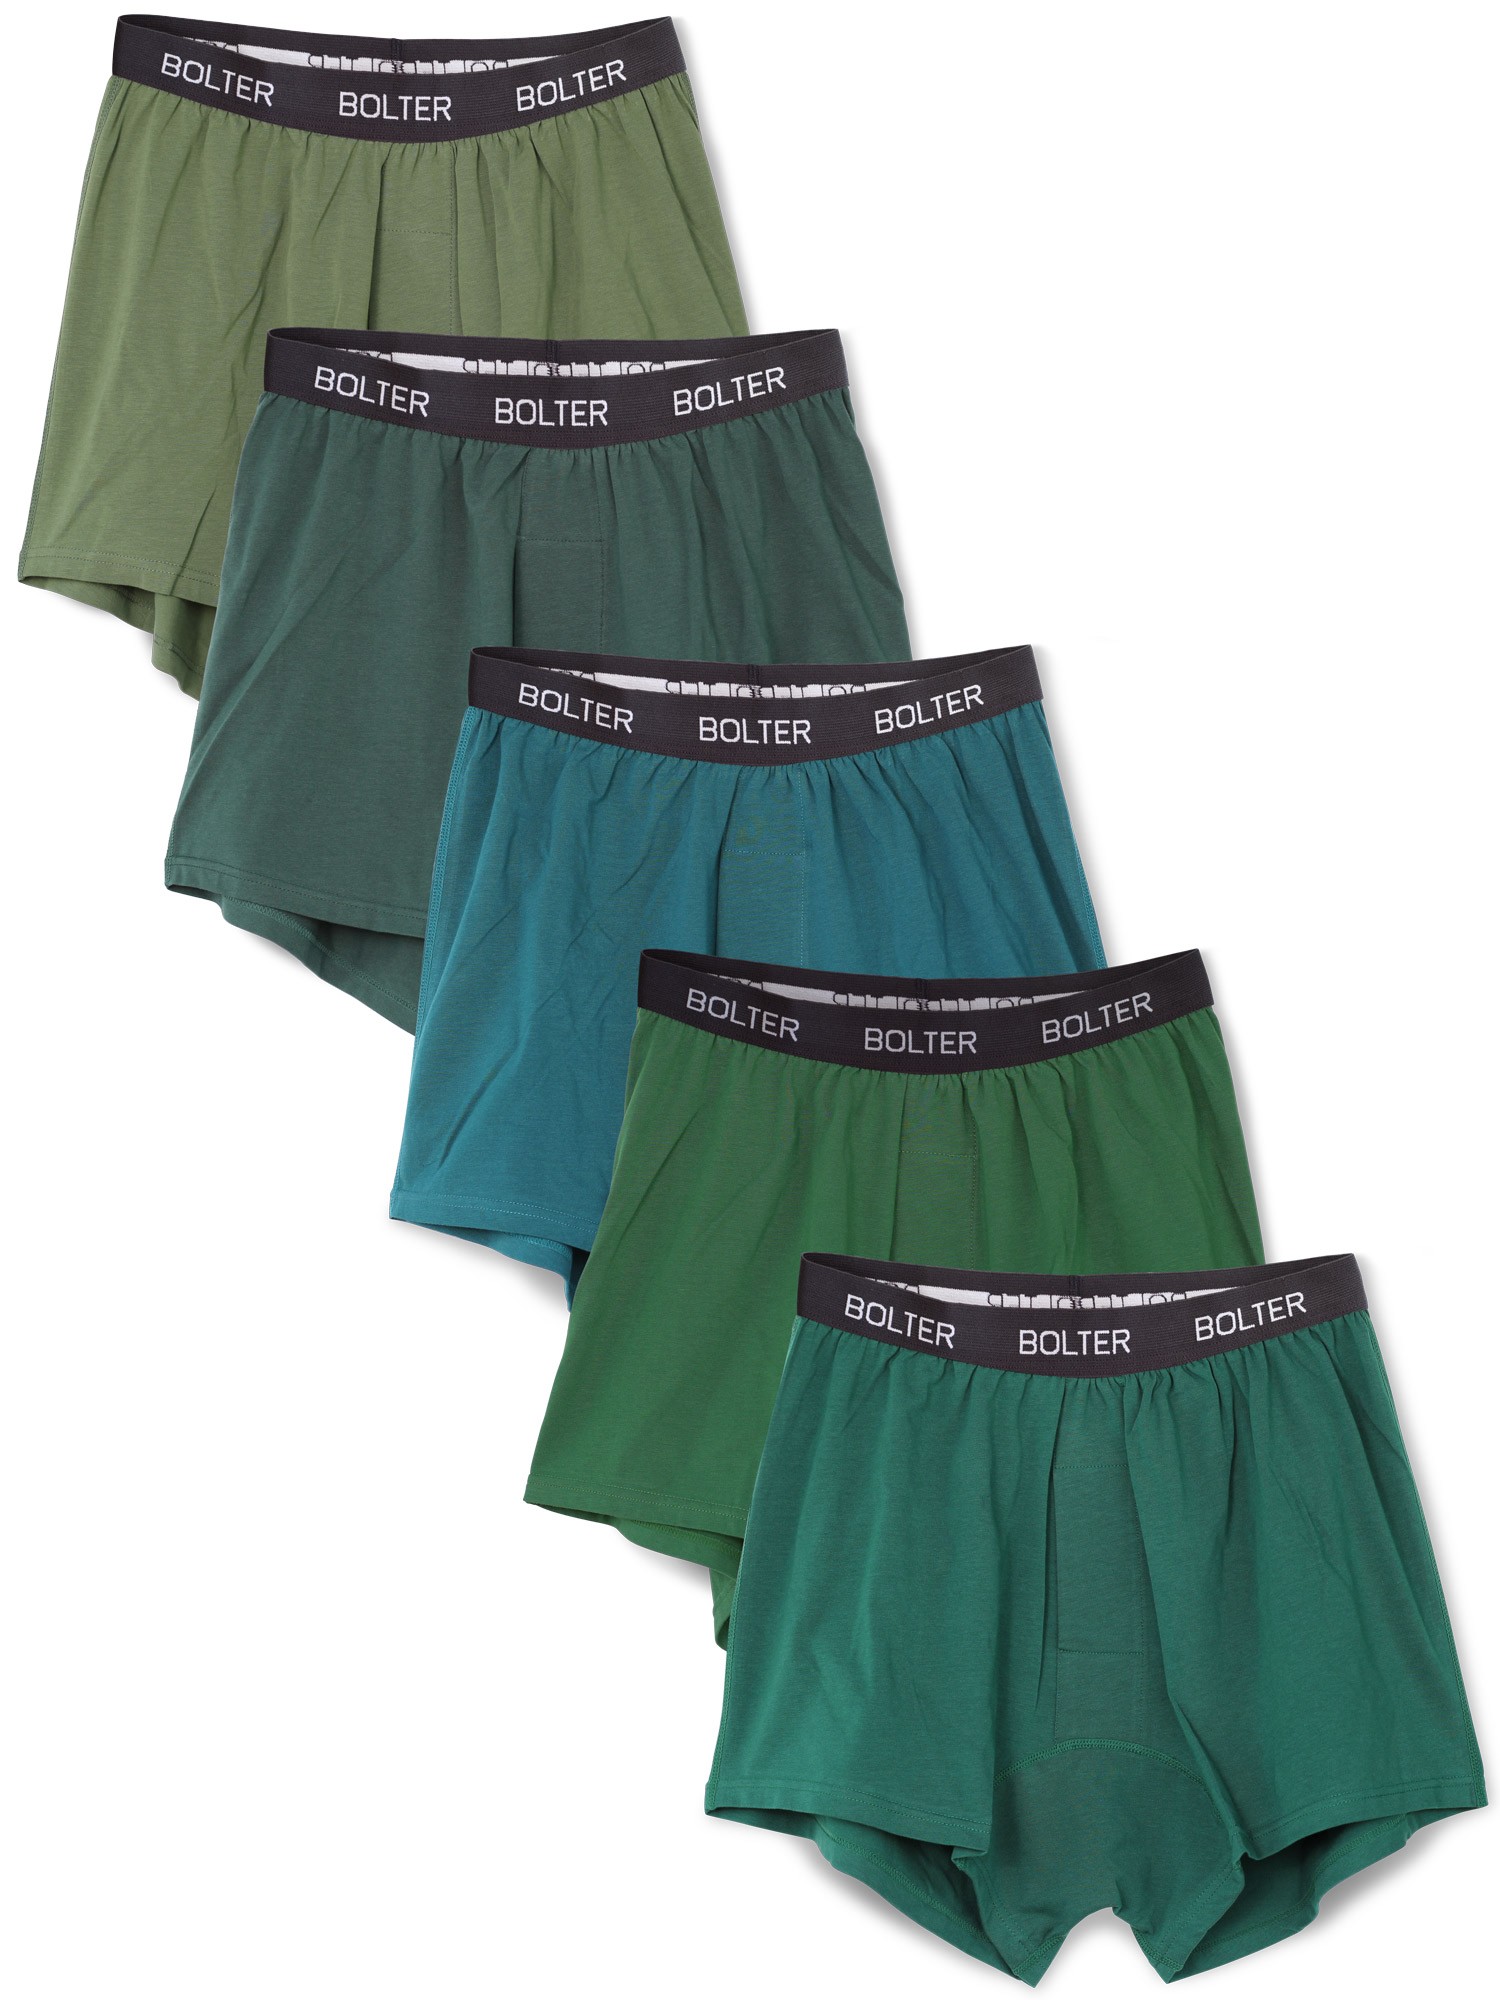 Bolter Men's 5-Pack Cotton Stretch Boxers Shorts (XXX-Large, Greens) - image 1 of 11